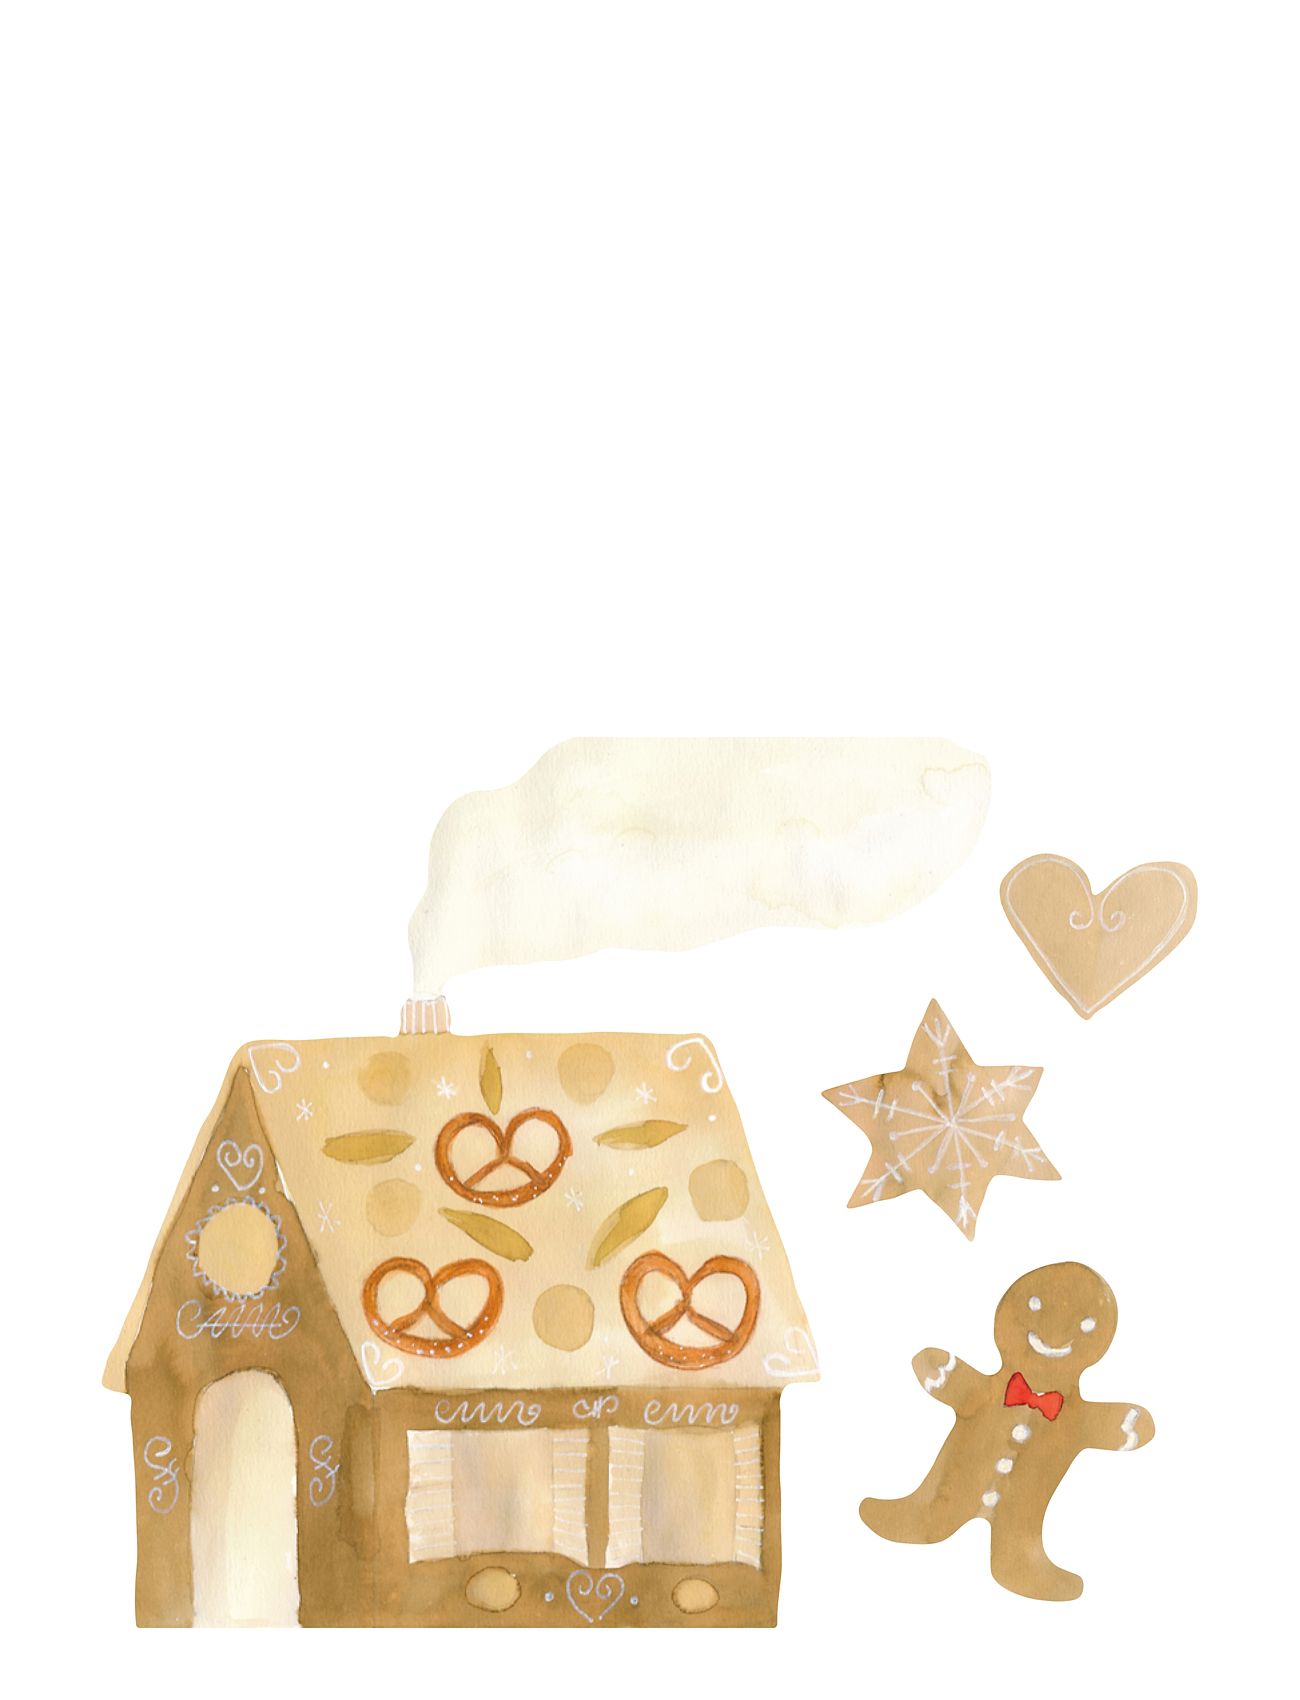 Gingerbread House Home Kids Decor Wall Stickers Nature Multi/patterned That's Mine